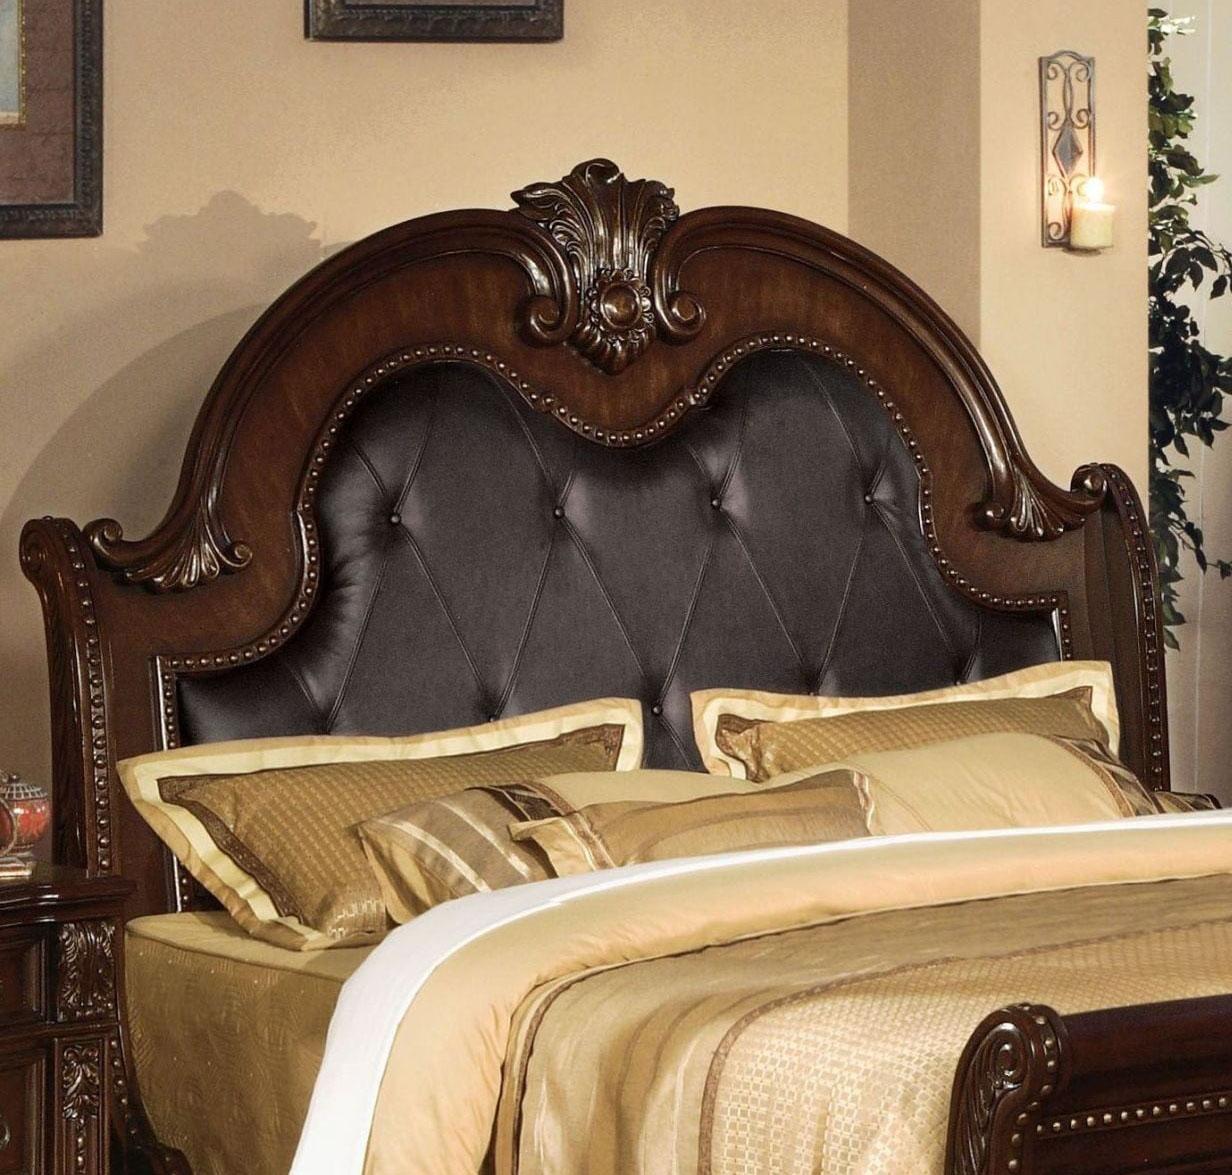 

    
Cherry Wood Espresso PU King Bed 10307EK Anondale Acme Traditional
